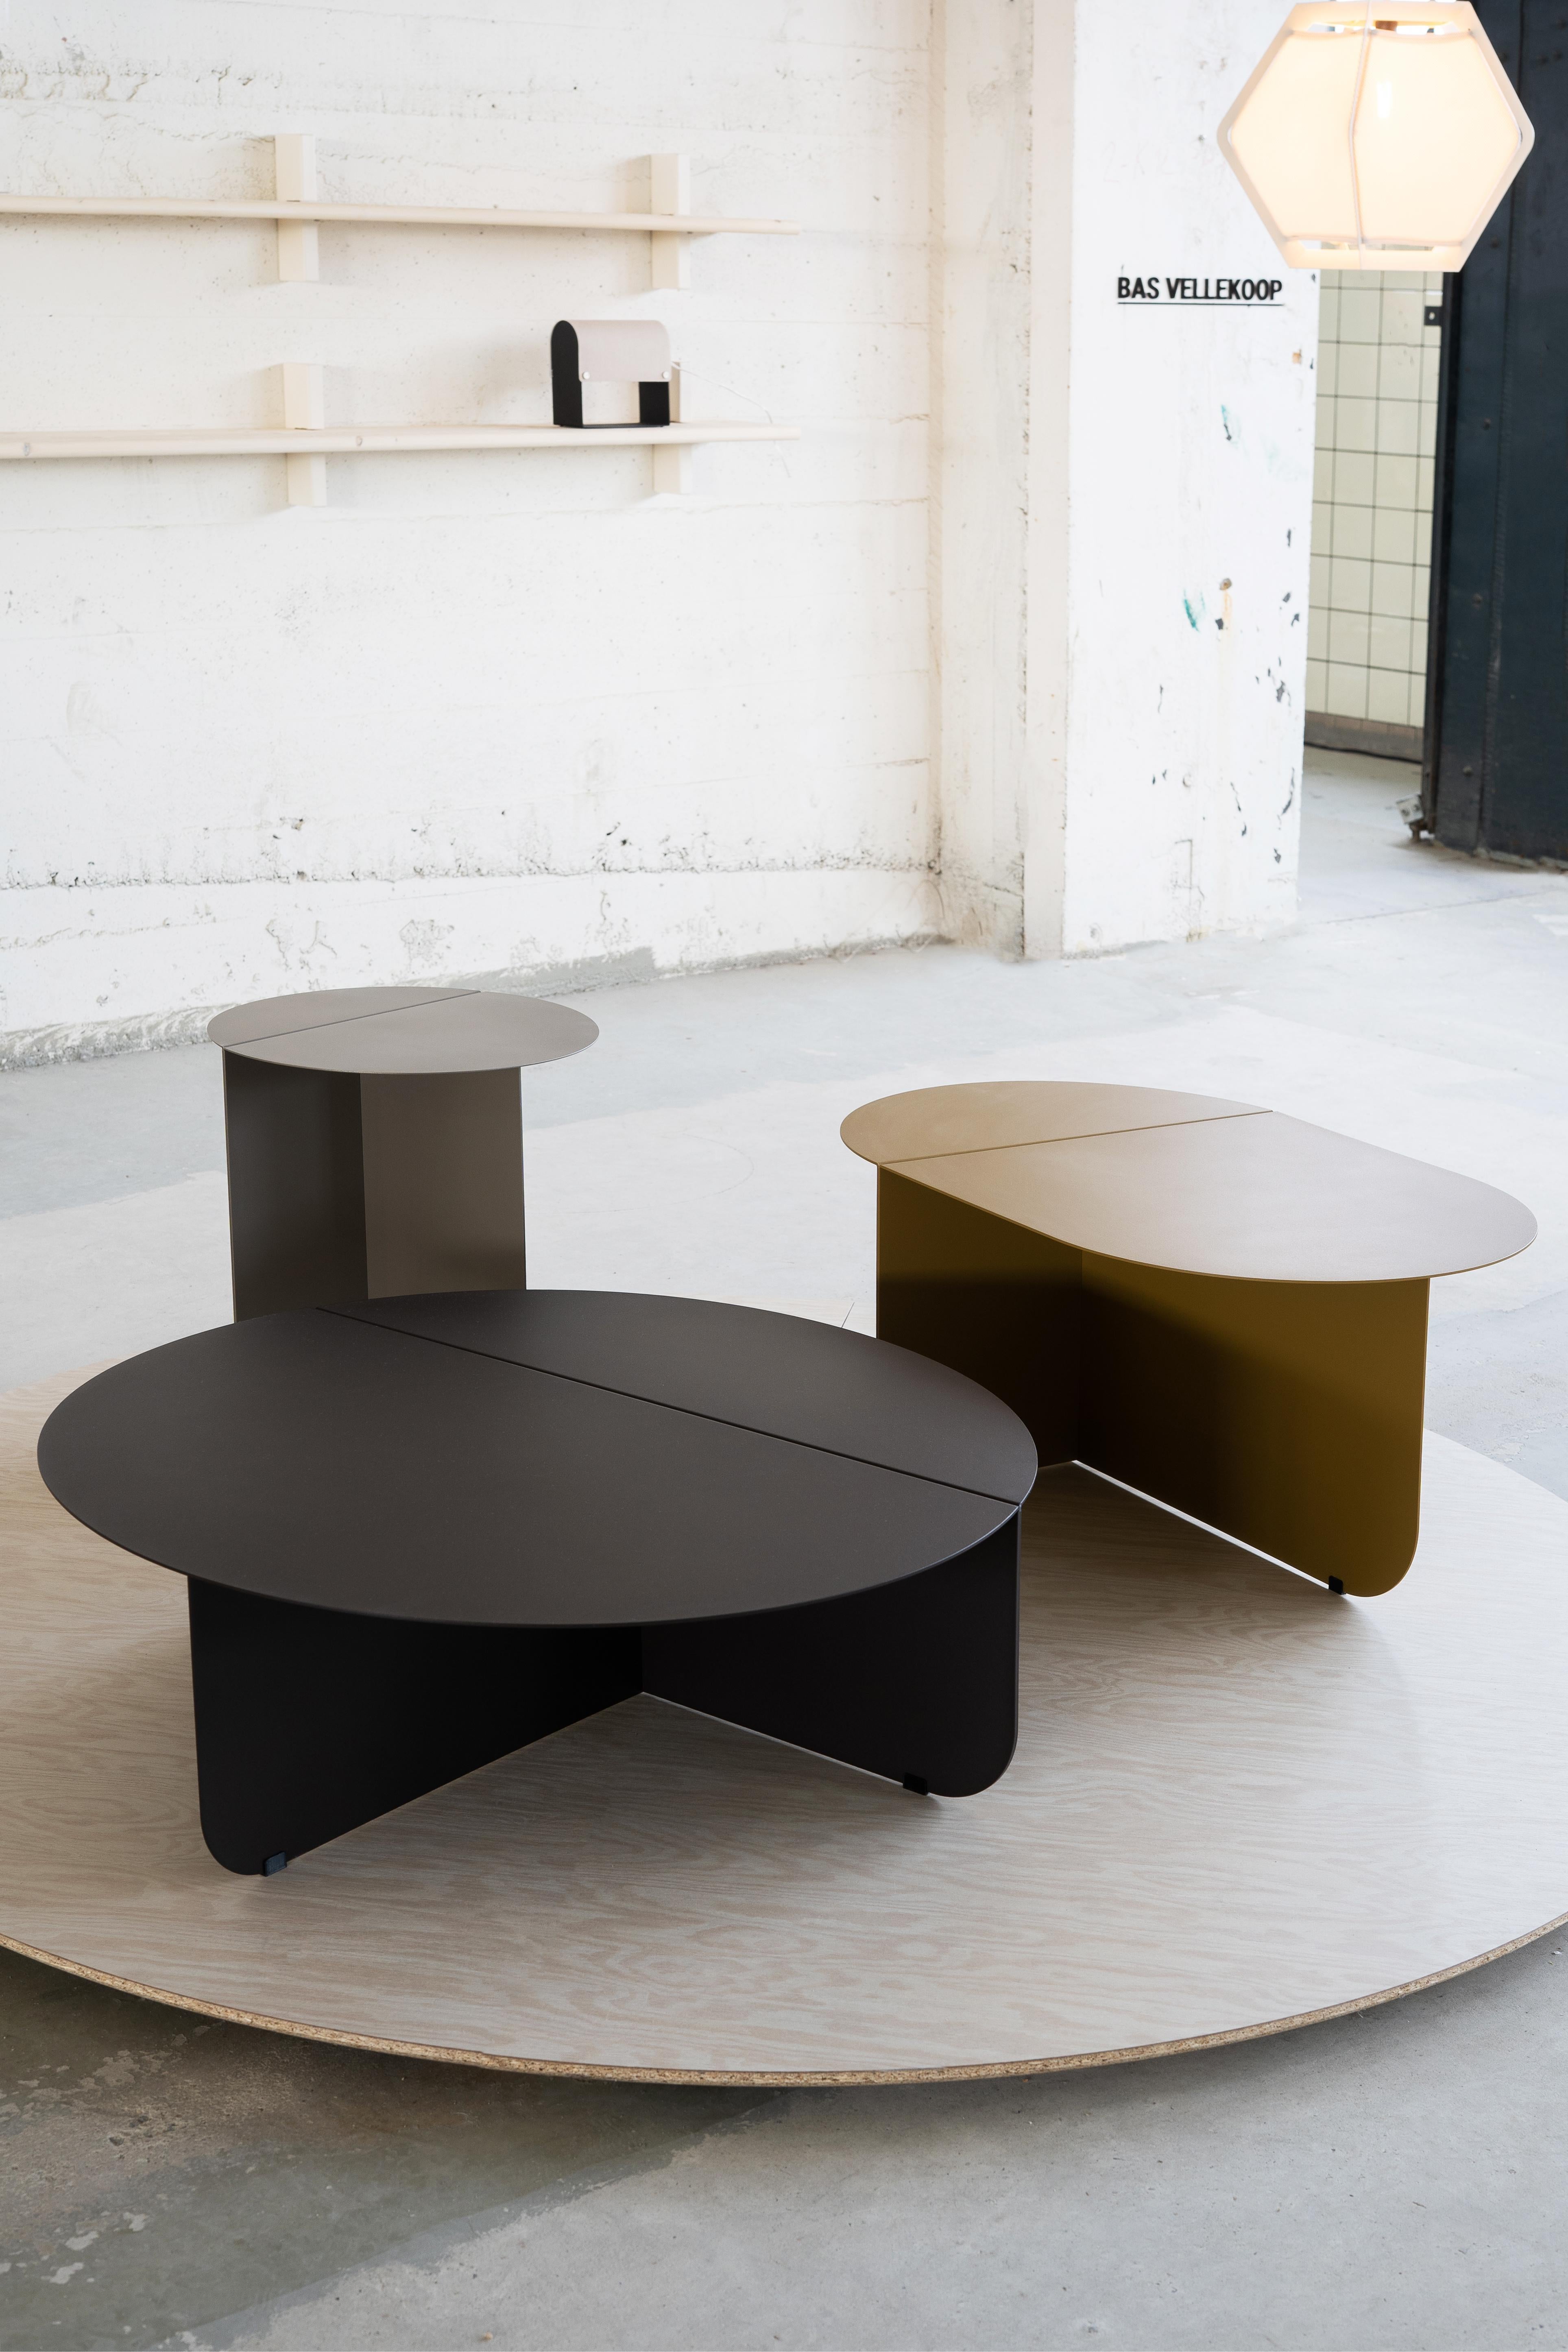 Contemporary Colour, a Modern Oval Coffee Table, Ral 1016 - Sulfur Yellow, by Bas Vellekoop For Sale